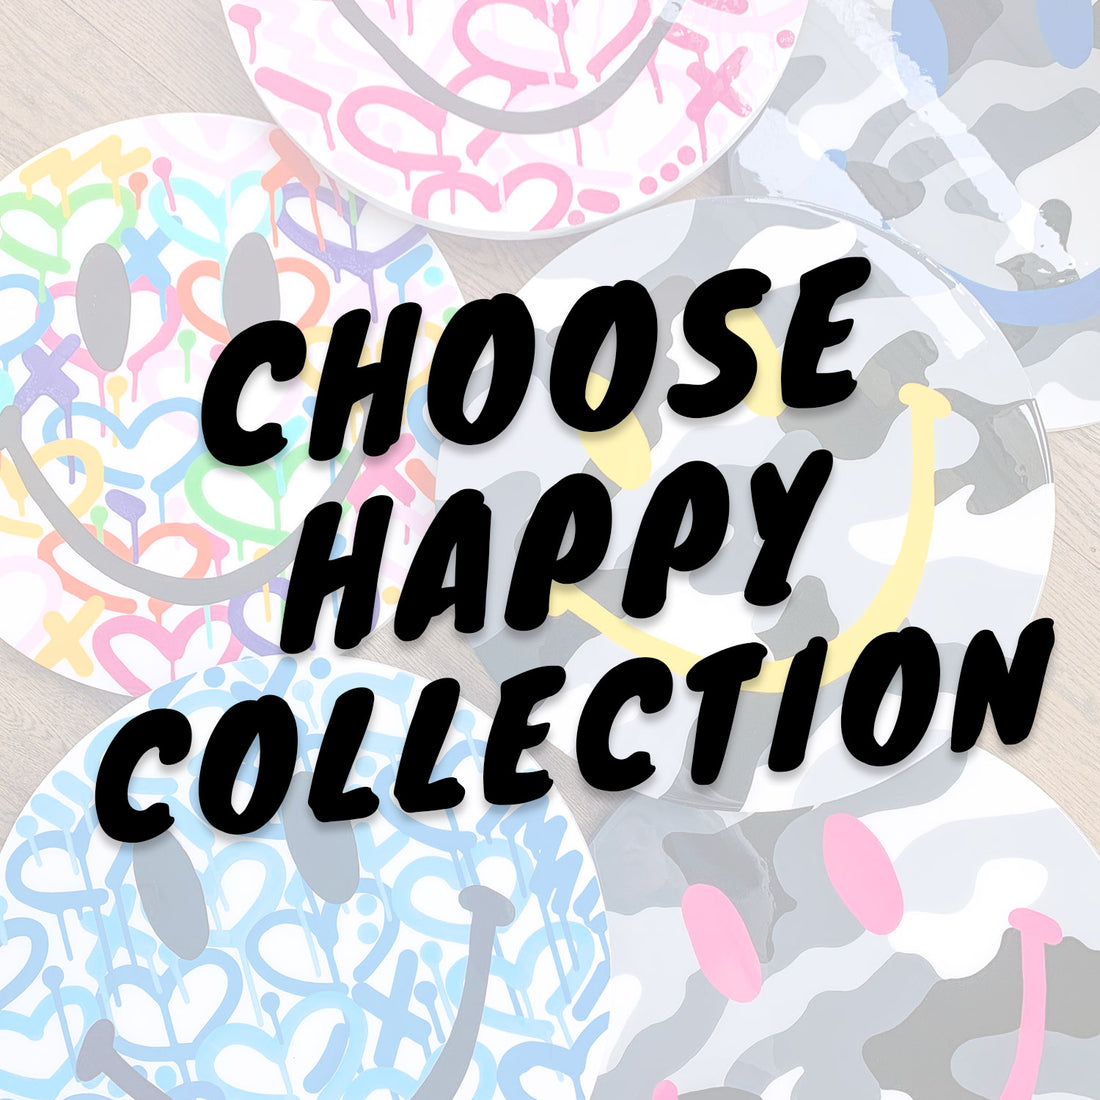 Choose Happy Capsule Collection